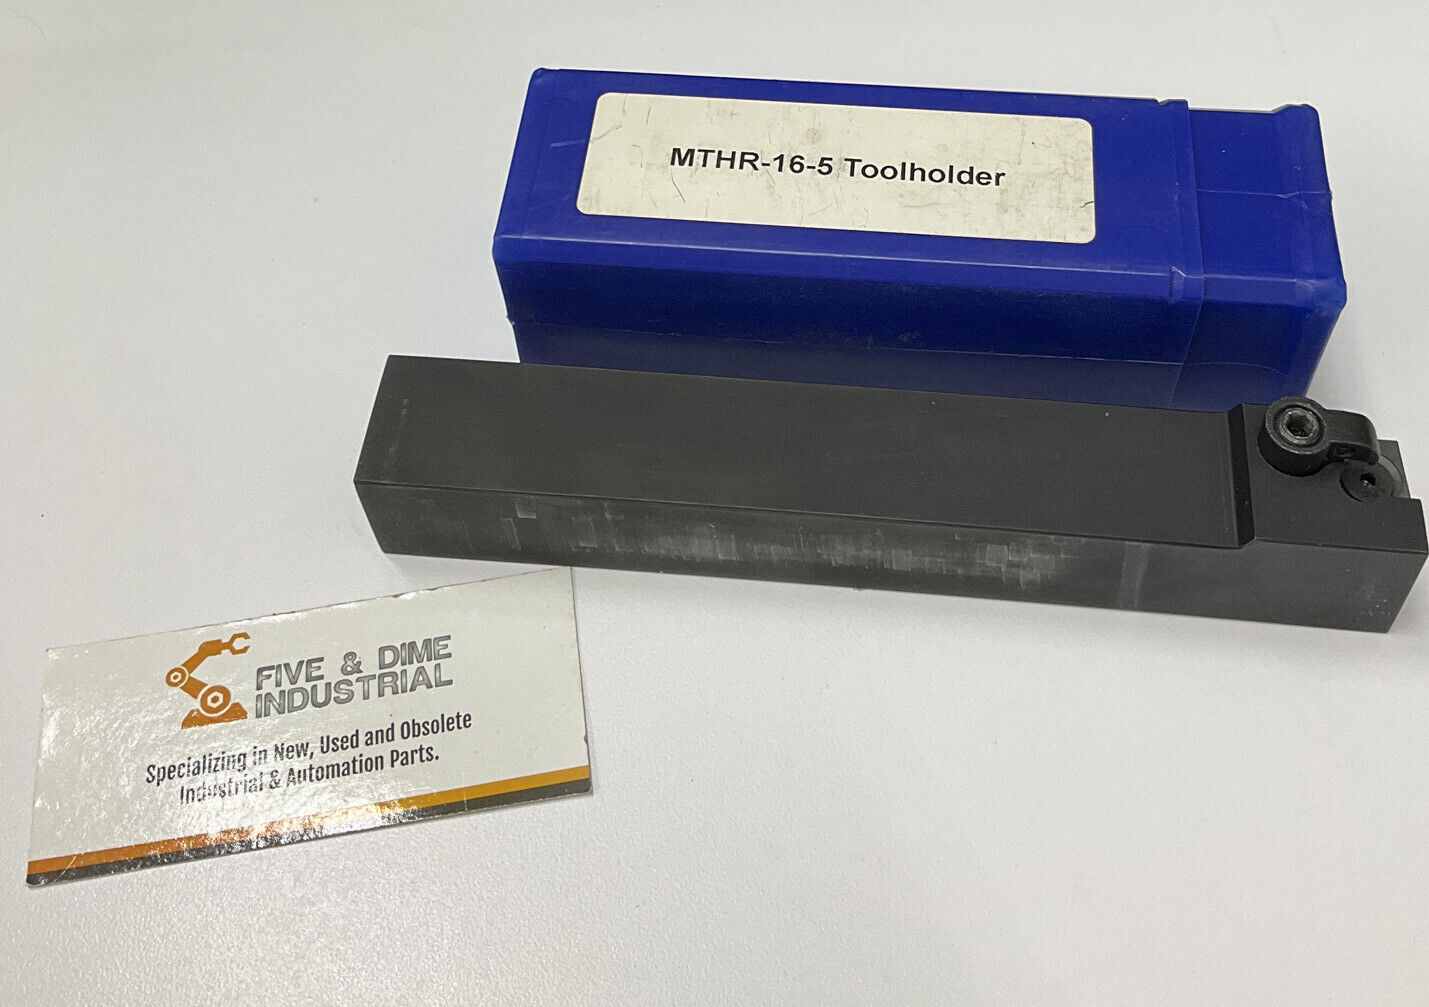 SCTools MTHR-16-5 ToolHolder For CNC & Metal Working (CL297)